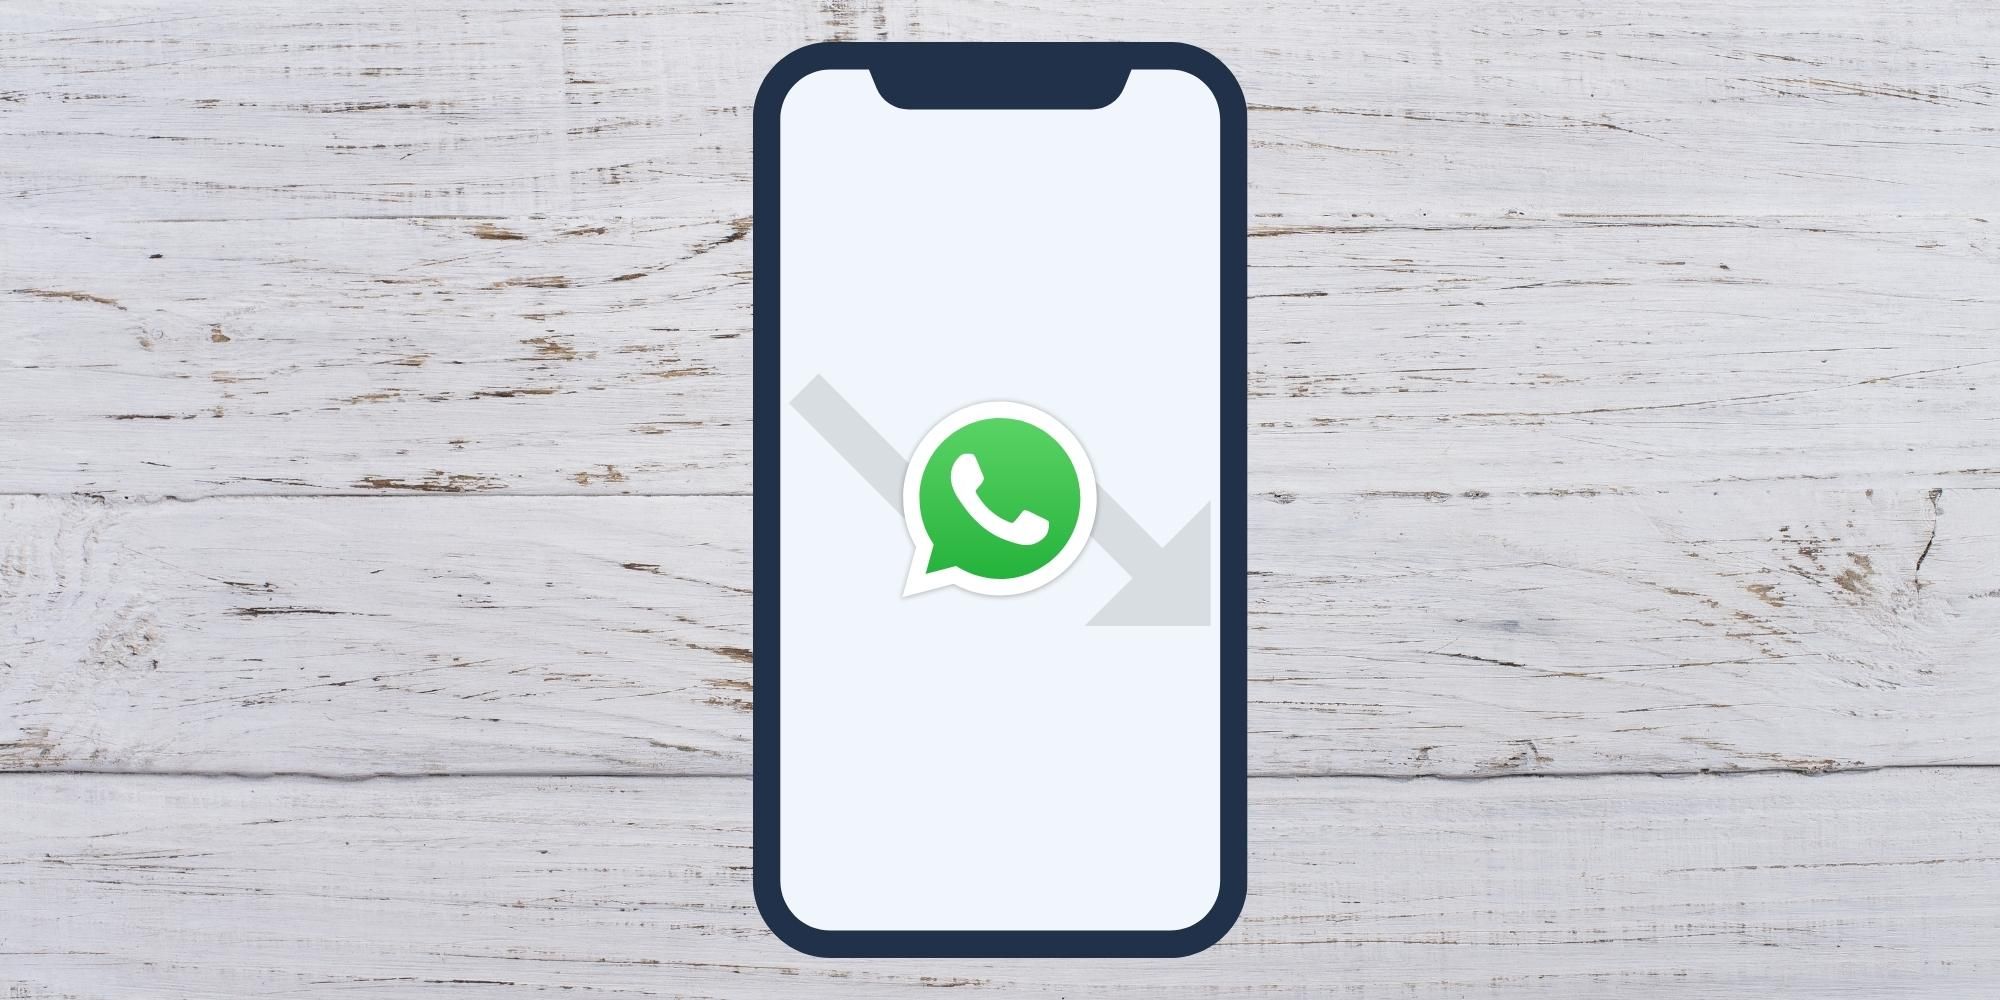 How to check if WhatsApp is down